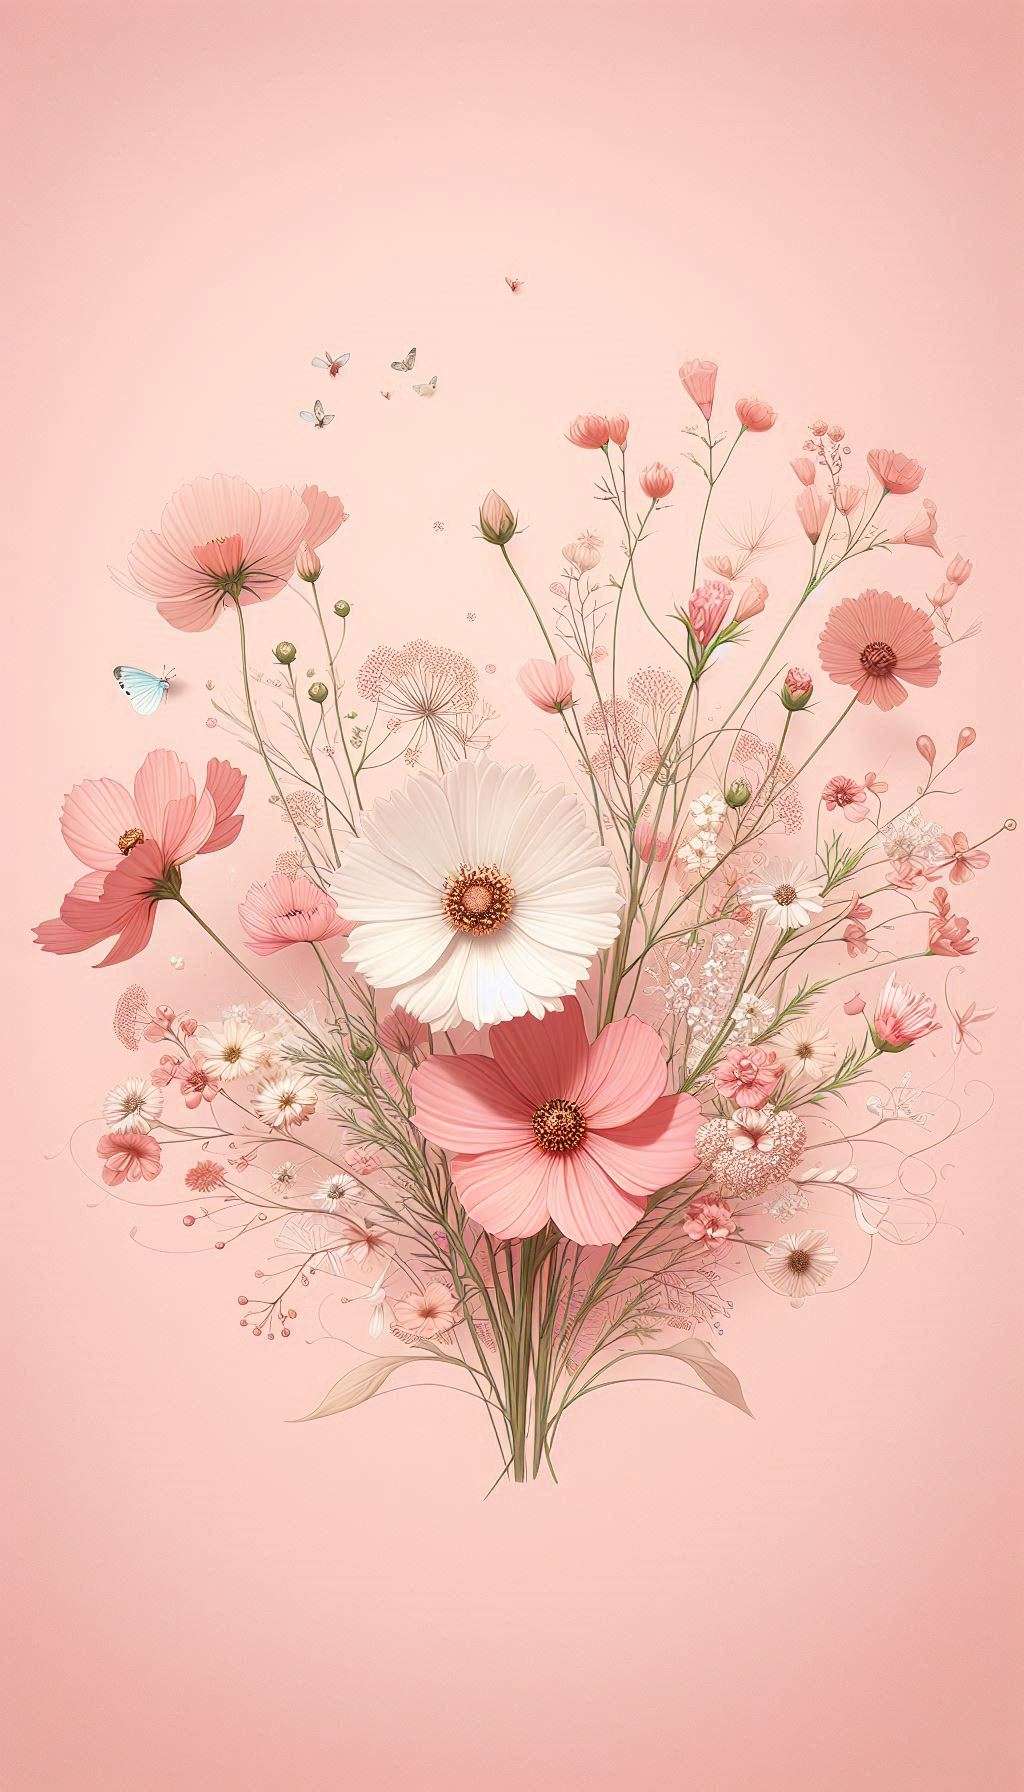 Download Free beautiful light pink background with flower for websites, slideshows, and designs | royalty-free and unlimited use.